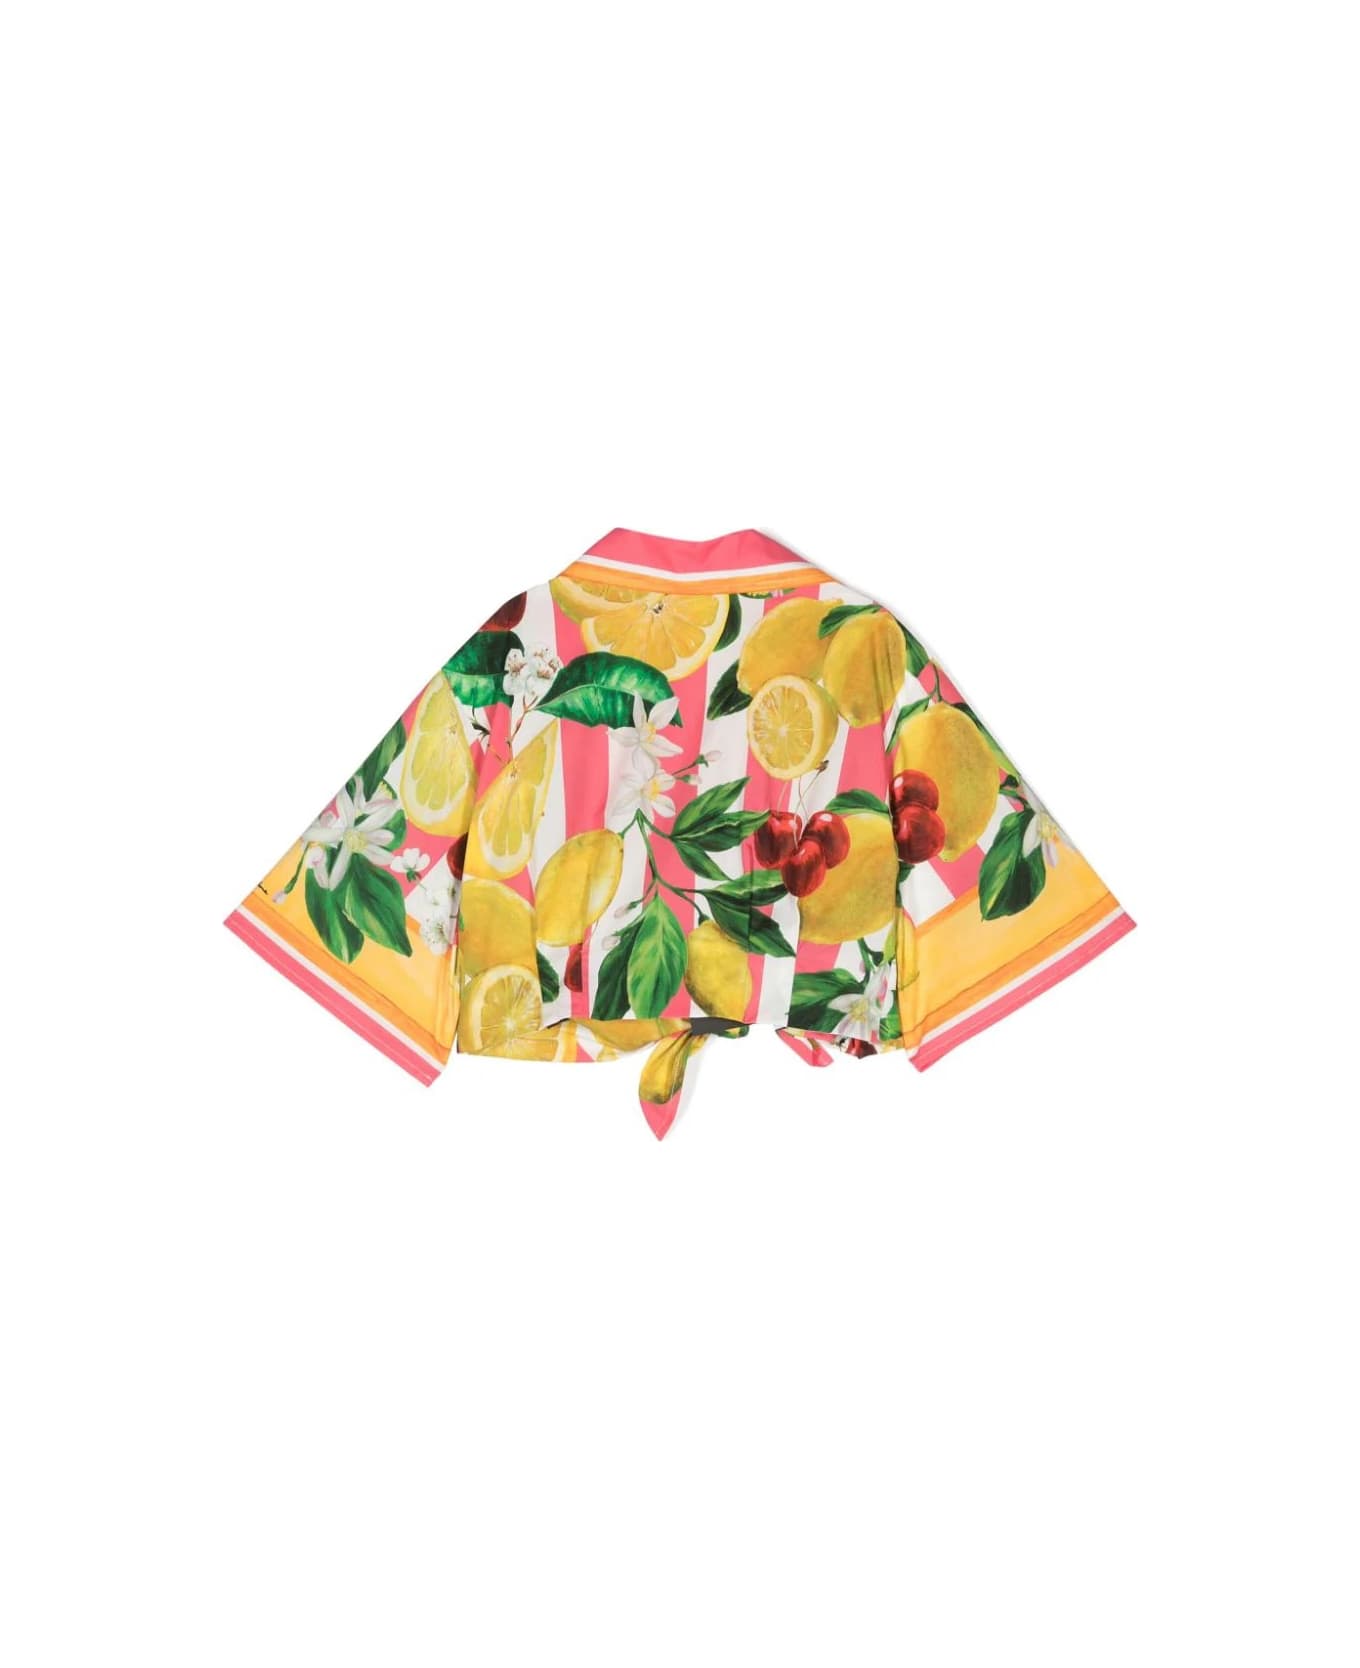 Dolce & Gabbana Cropped Shirt With Lemon And Cherry Print - Multicolour シャツ